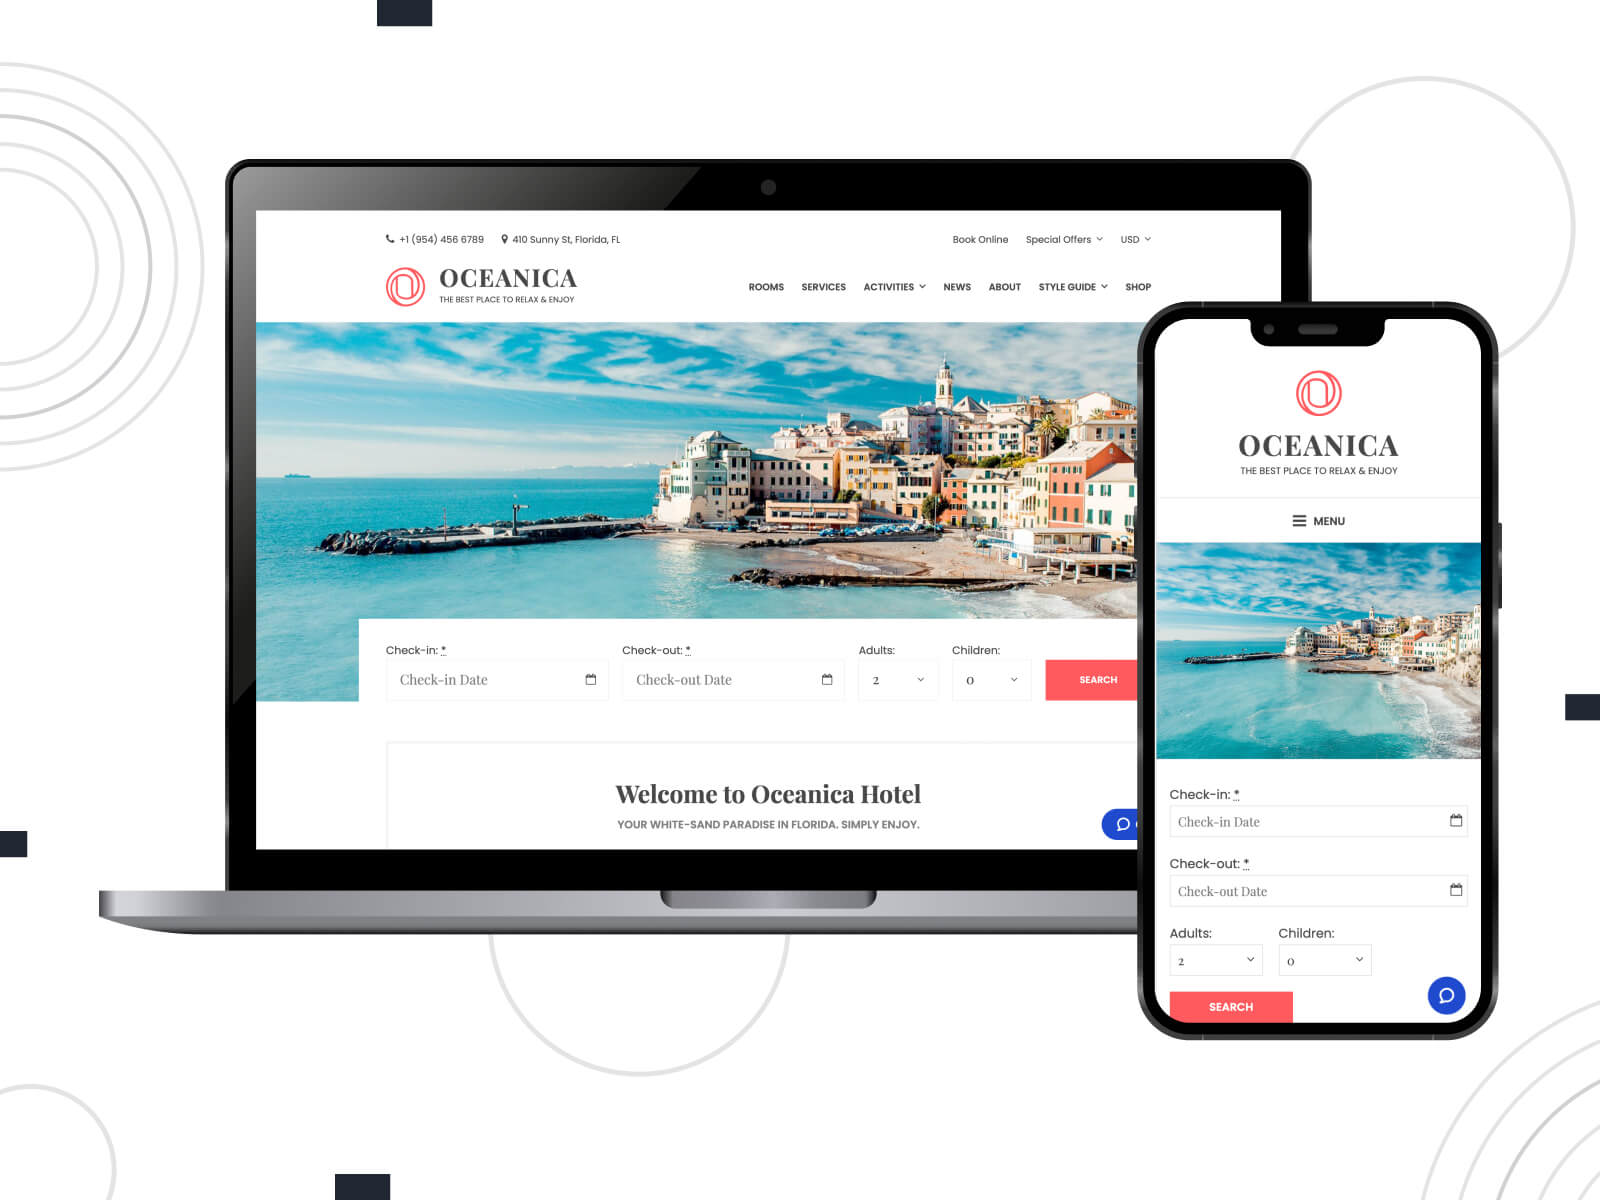 Snapshot of Oceanica - bright, crisp, one of the best WordPress themes, it features dynamic templates with video backgrounds and animations in light sea green, cadet blue, and light steel blue hues.